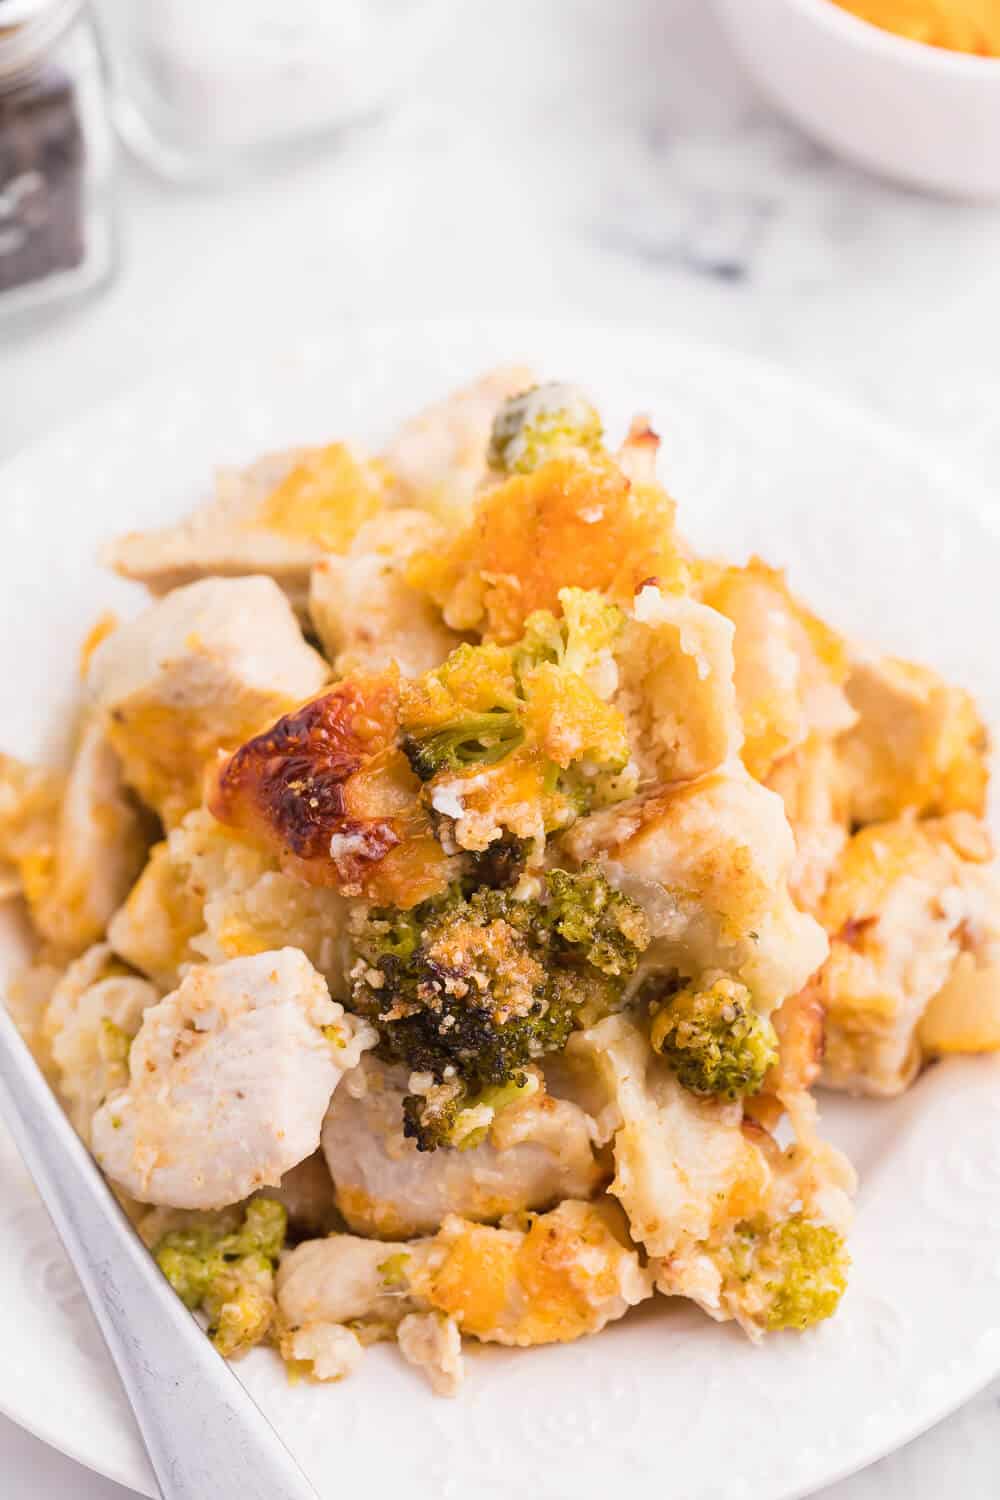 A serving of chicken broccoli biscuit bake on a white plate.